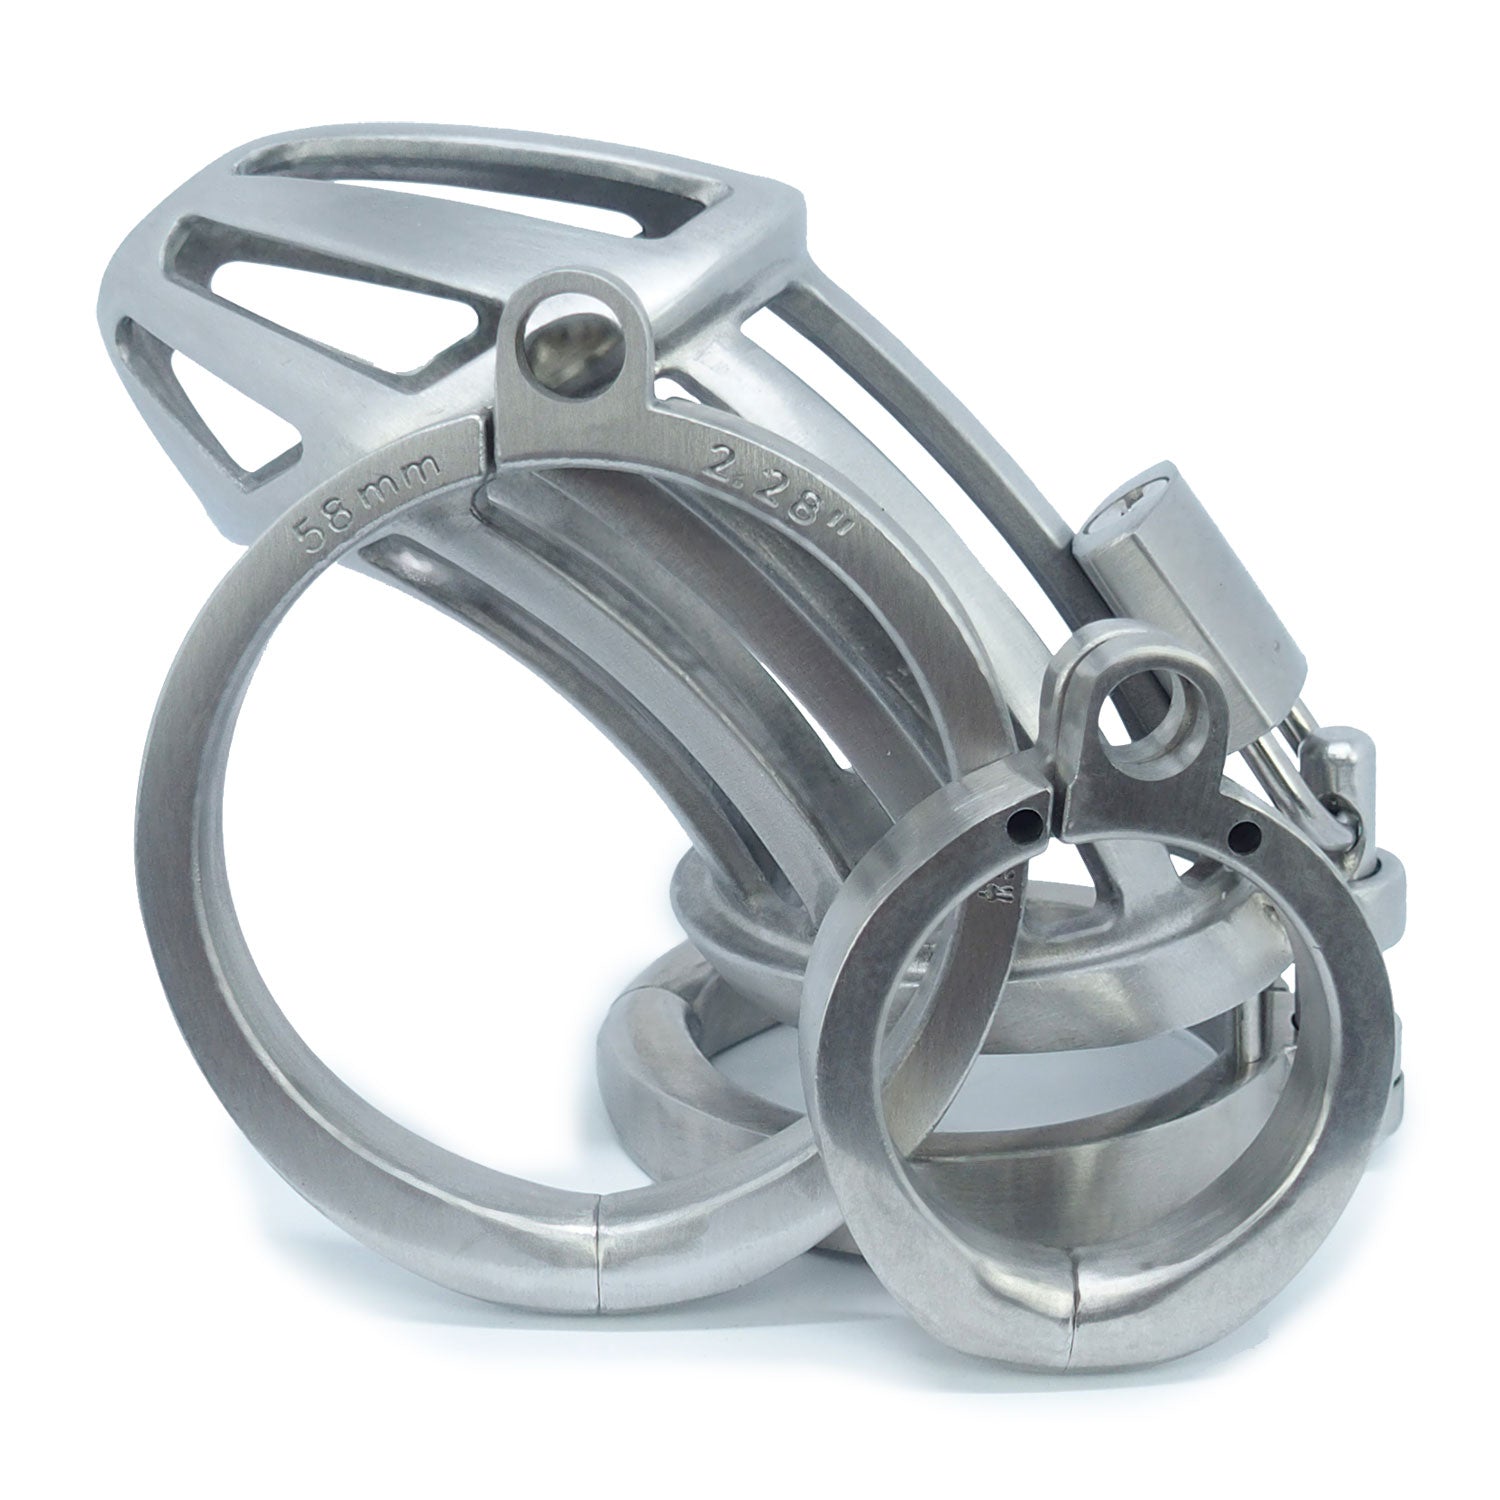 Stainless Steel Male Chastity Device Large Cage for Men Long Metal Lock  Belt 147